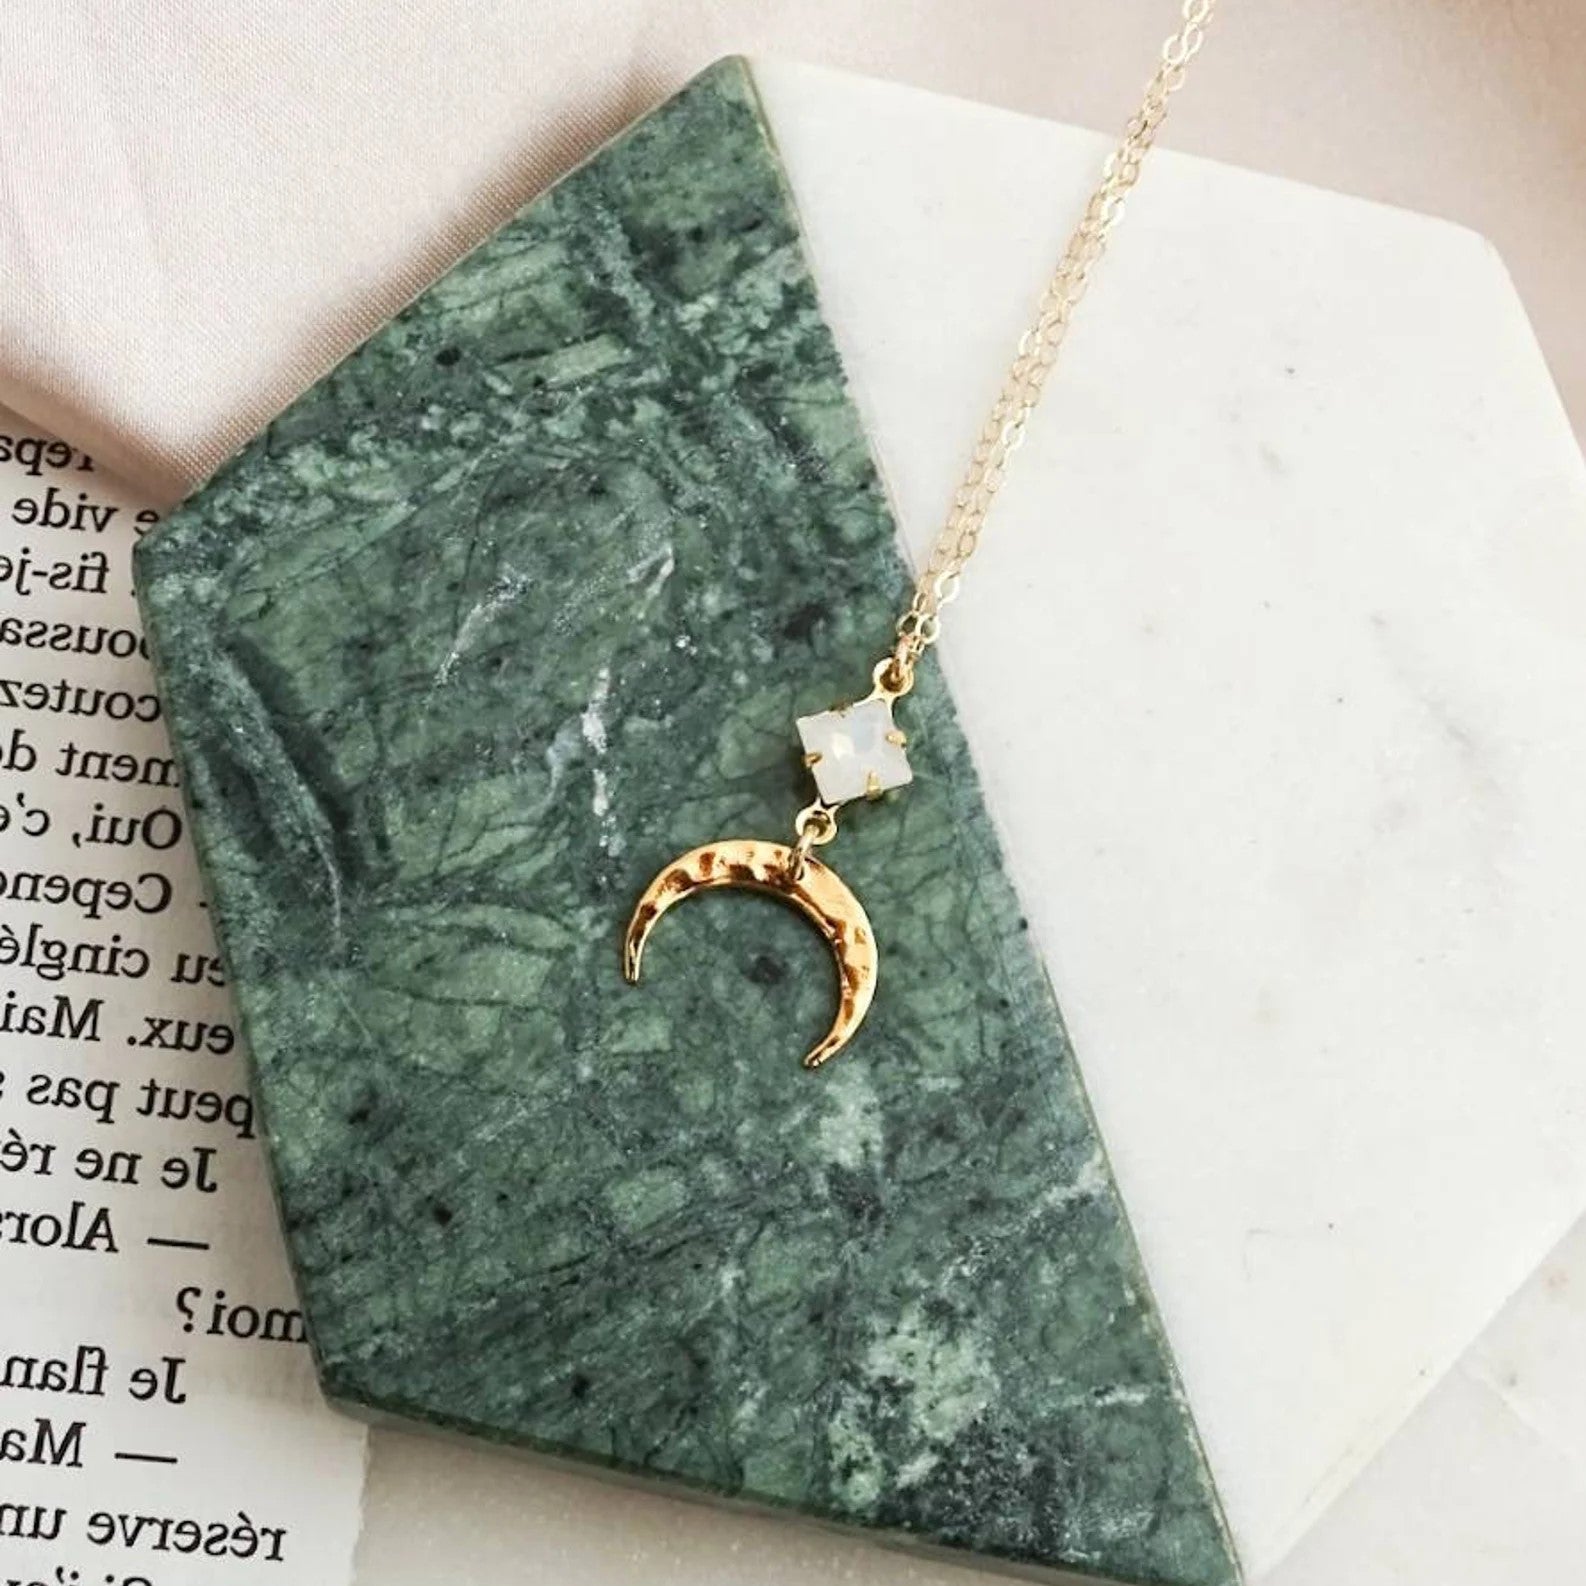 Waxing Crescent I Luna Necklace - Your Moon Phase